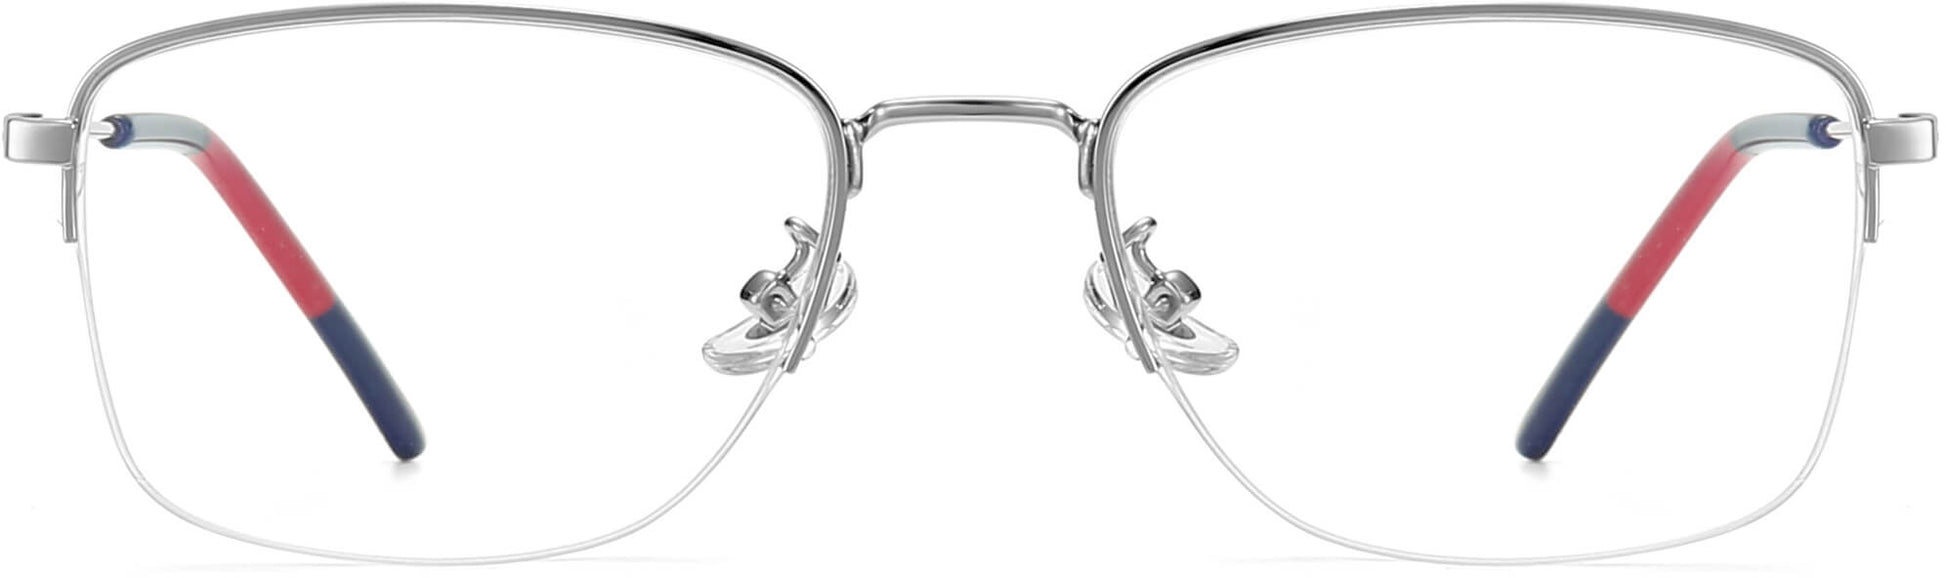 Callen Rectangle Silver Eyeglasses from ANRRI, front view